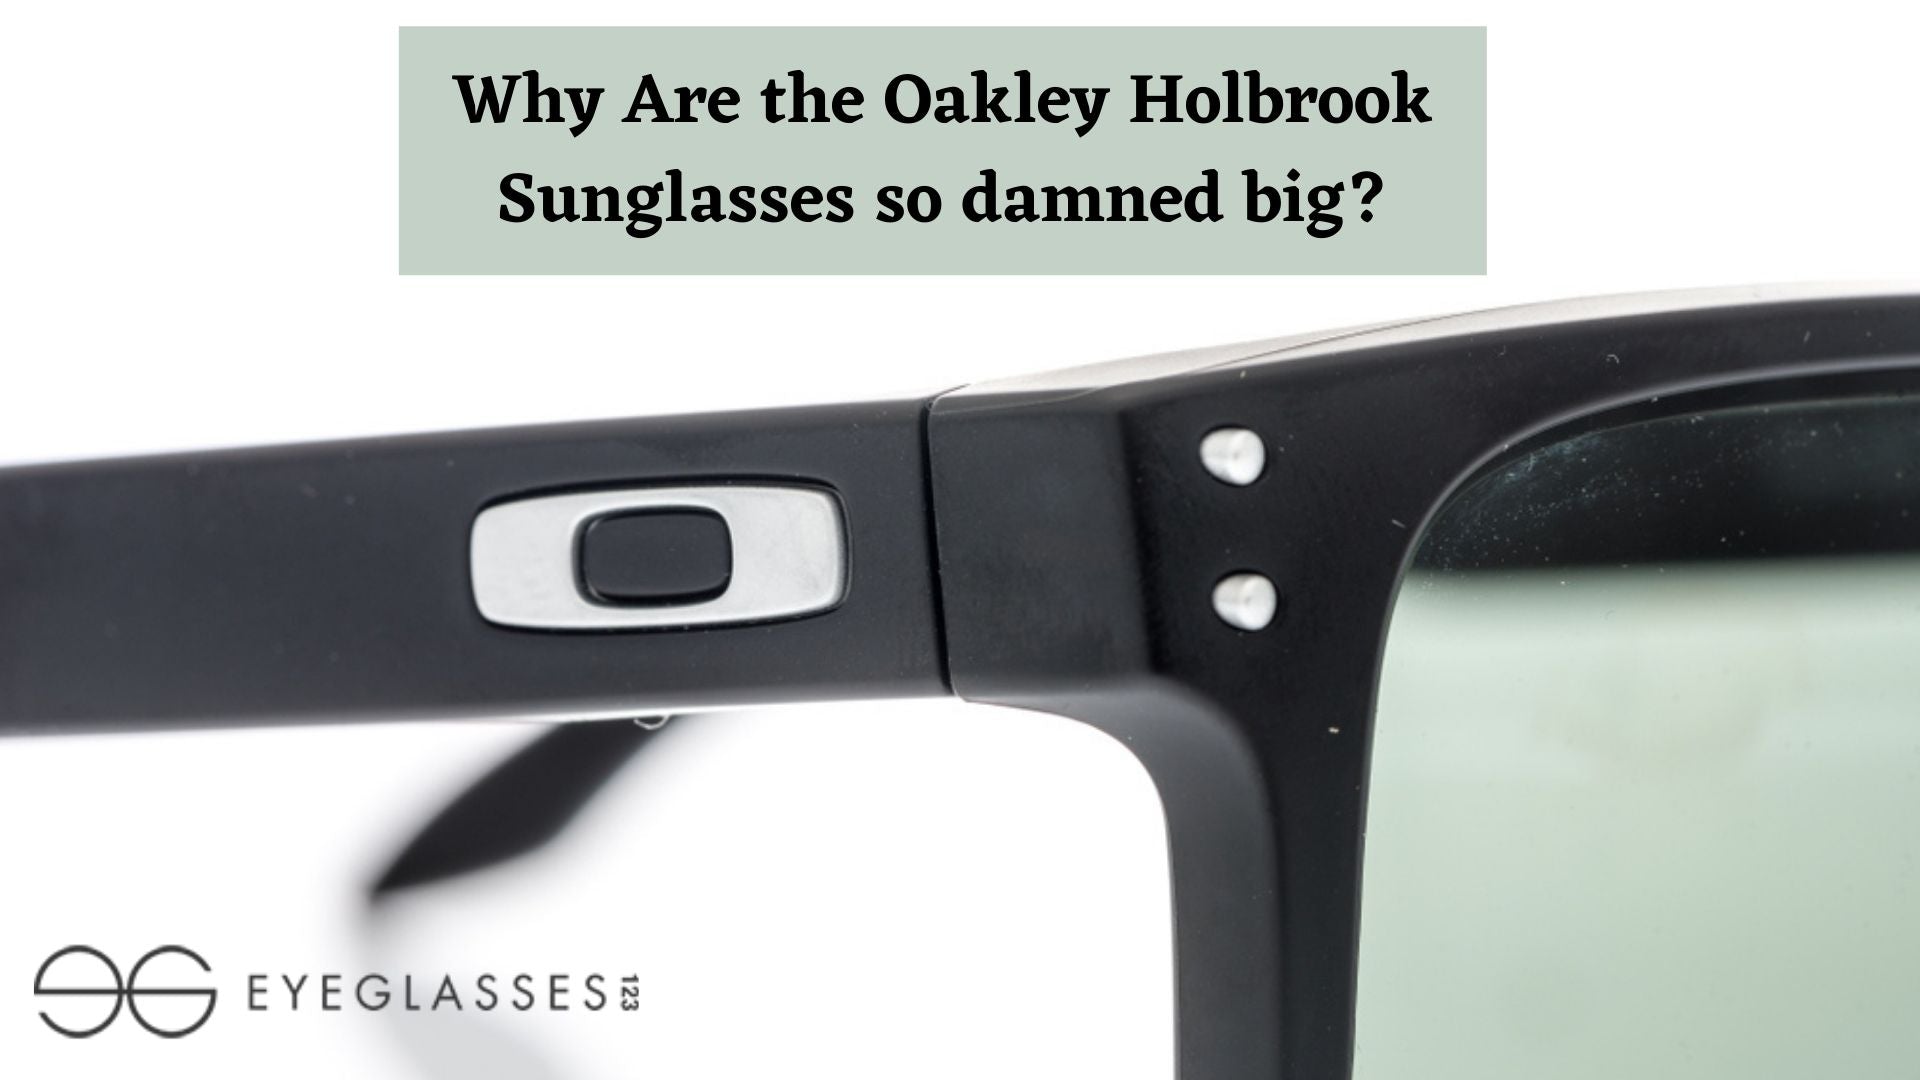 Why Are the Oakley Holbrook Sunglasses so damned big?